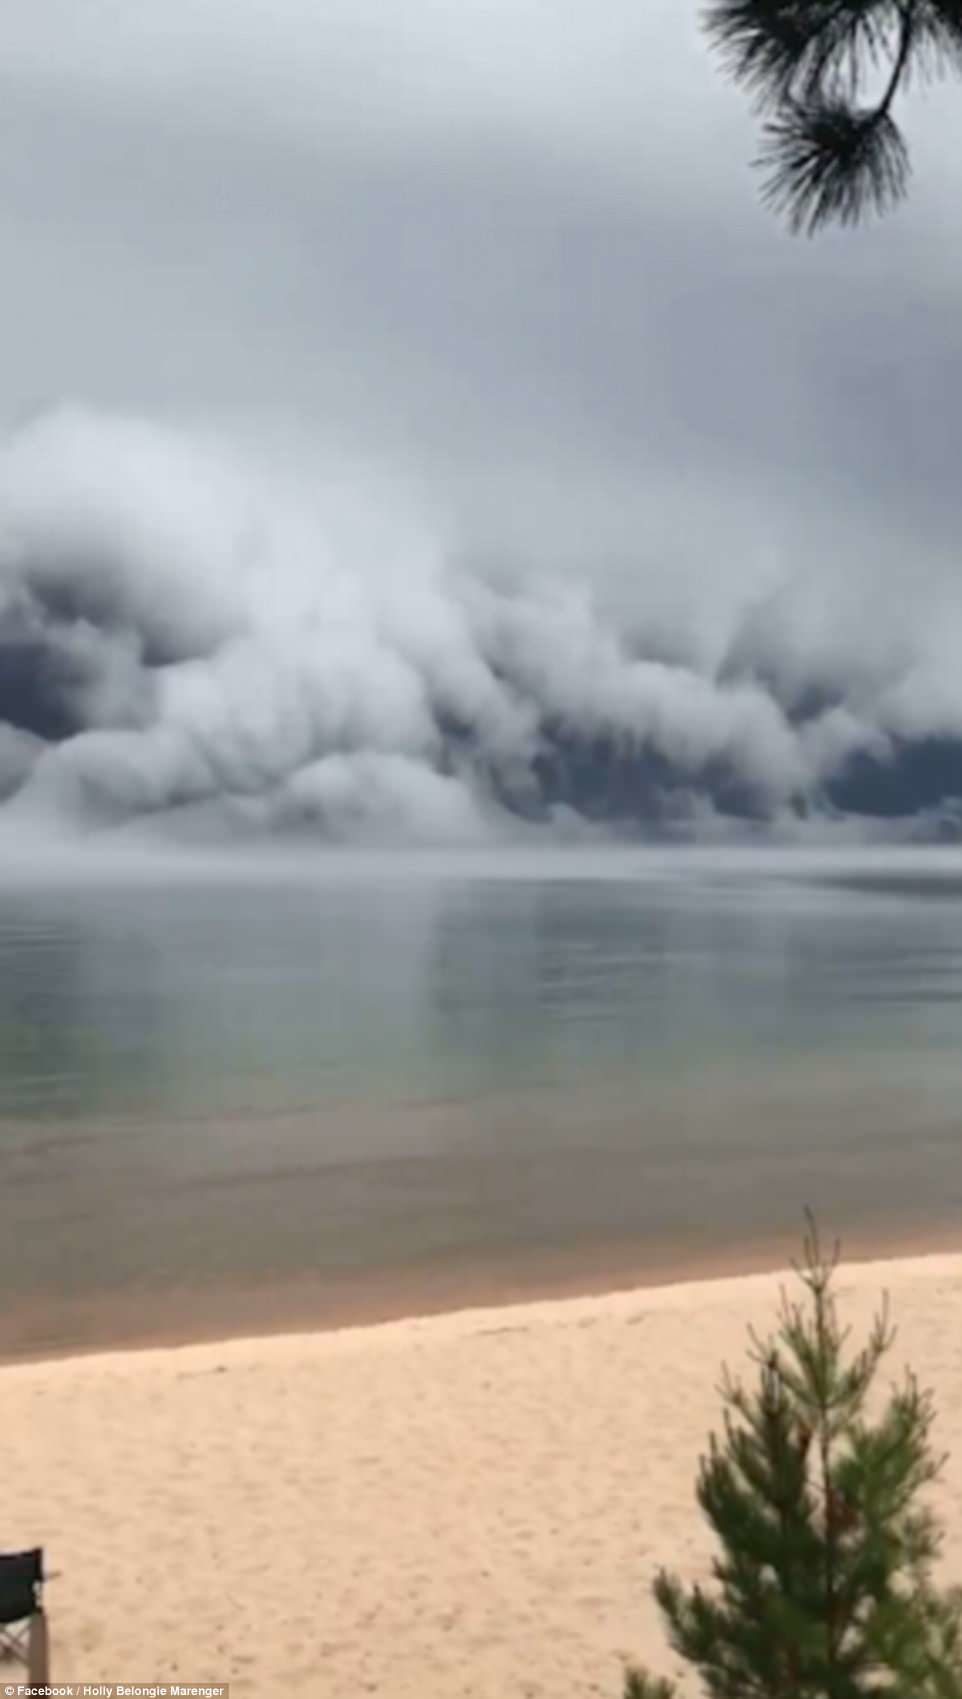 These rare, intimidating looking events were officially named as a new type of cloud in the World Meteorological Organisation's Cloud Atlas just last year